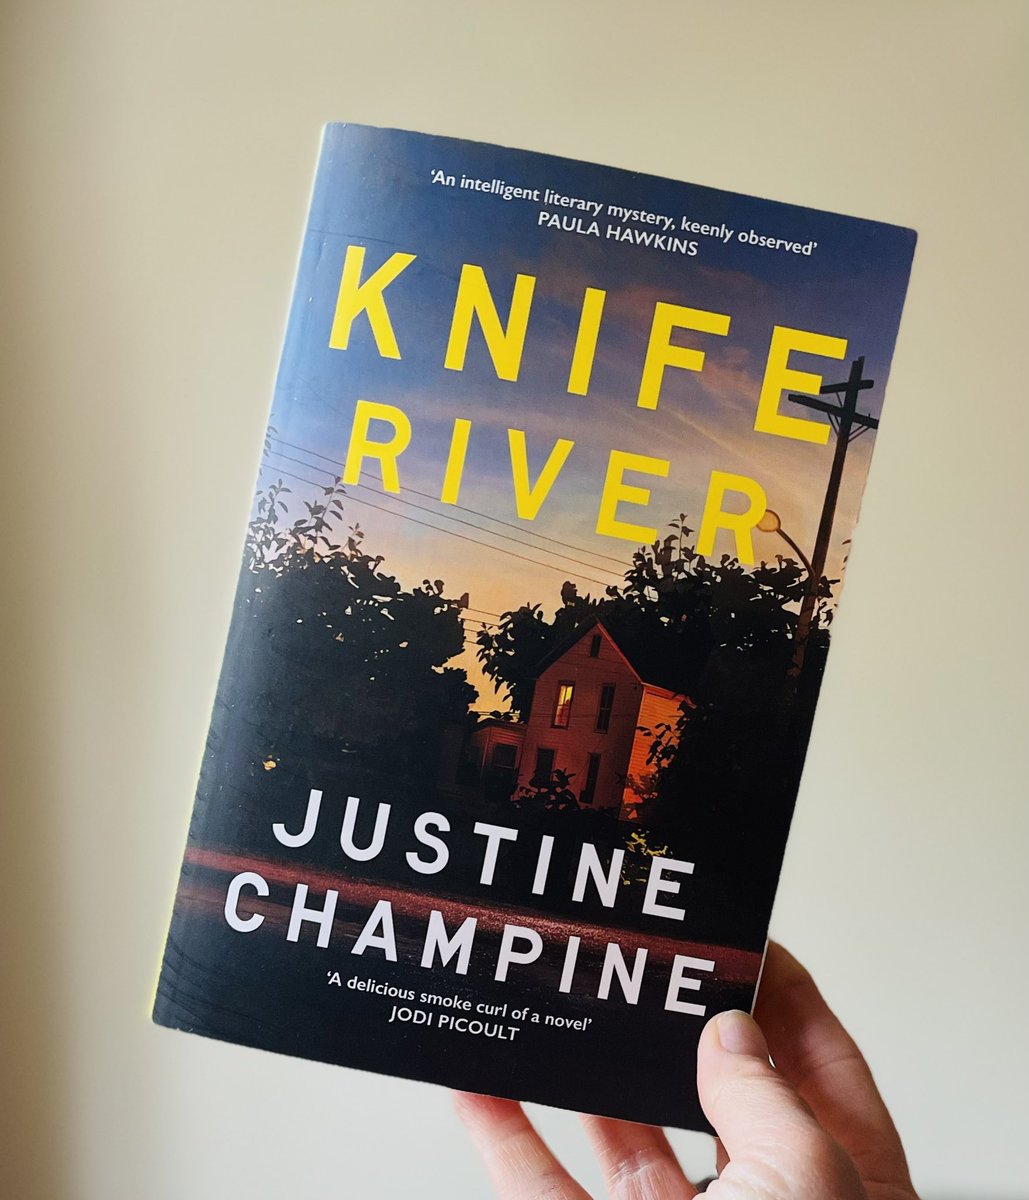 Thank you so much to Beth and #ManillaPress and @bonnierbooks_uk for my copy of #KnifeRiver by #JustineChampine which is out on June 6th. Described as a new voice in literary crime, I think this sounds brilliant!